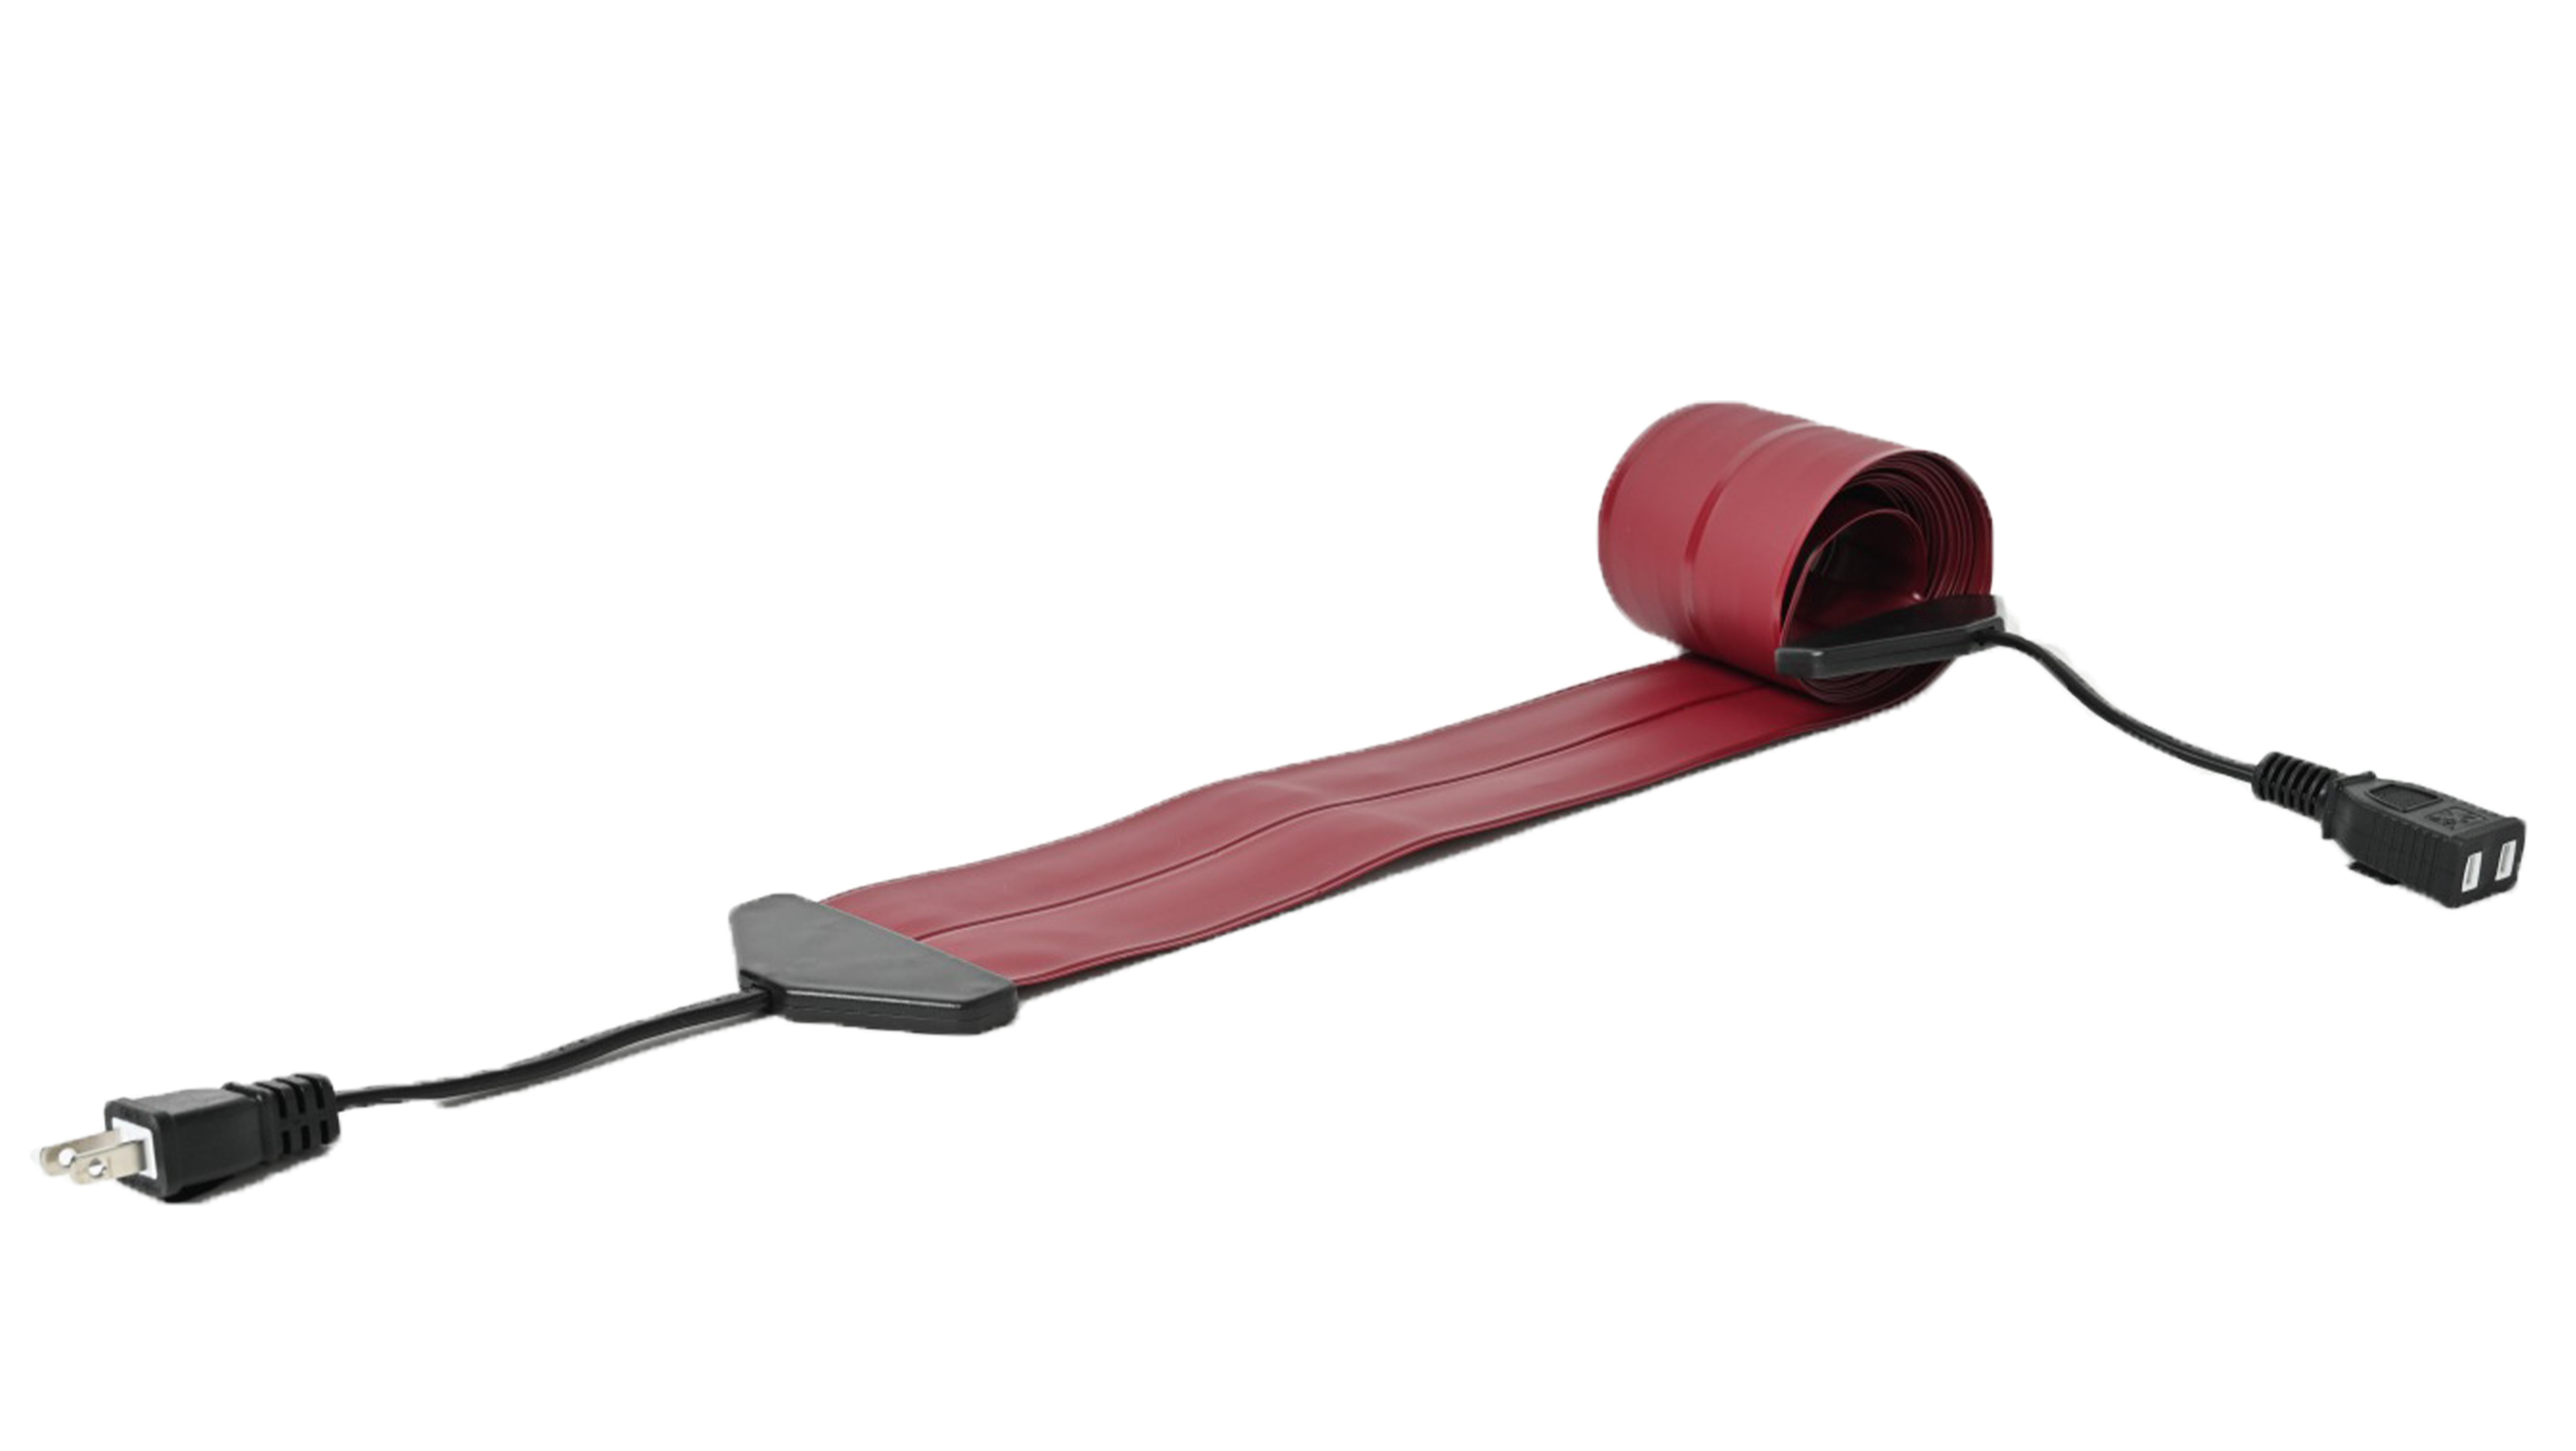 Koumeican the thinnest extension power cord in the world【Wine Red】